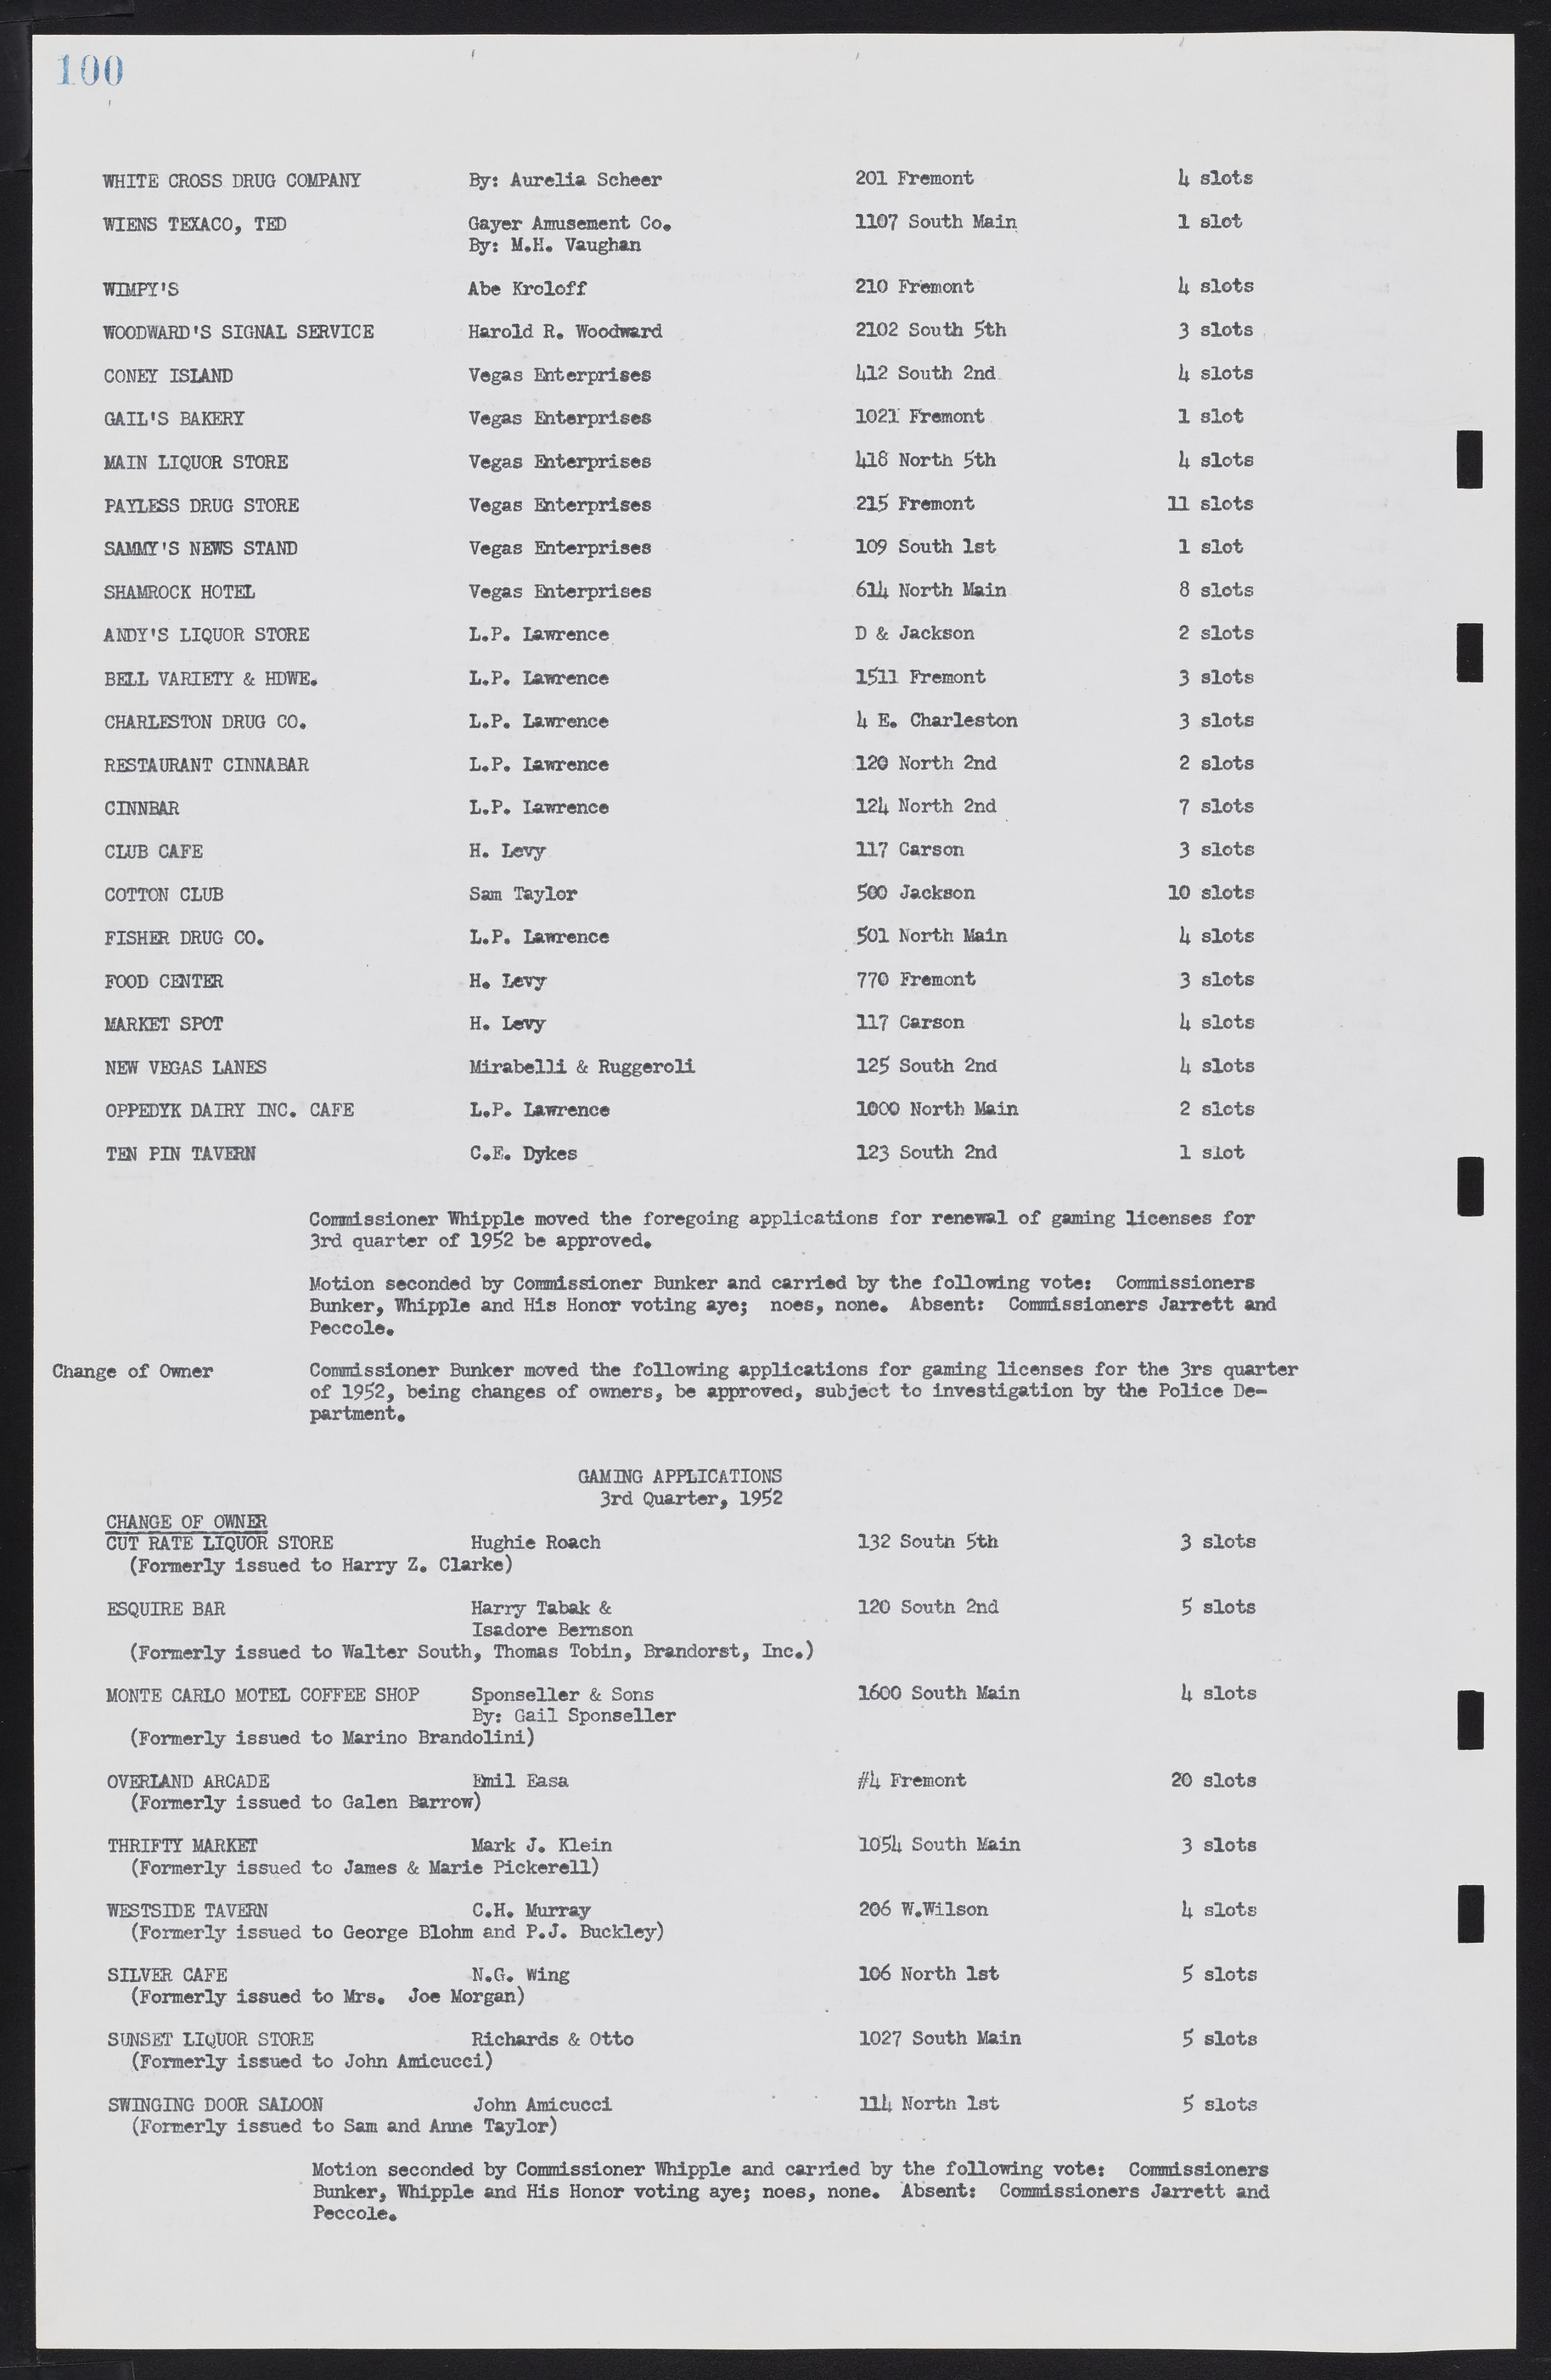 Las Vegas City Commission Minutes, May 26, 1952 to February 17, 1954, lvc000008-104